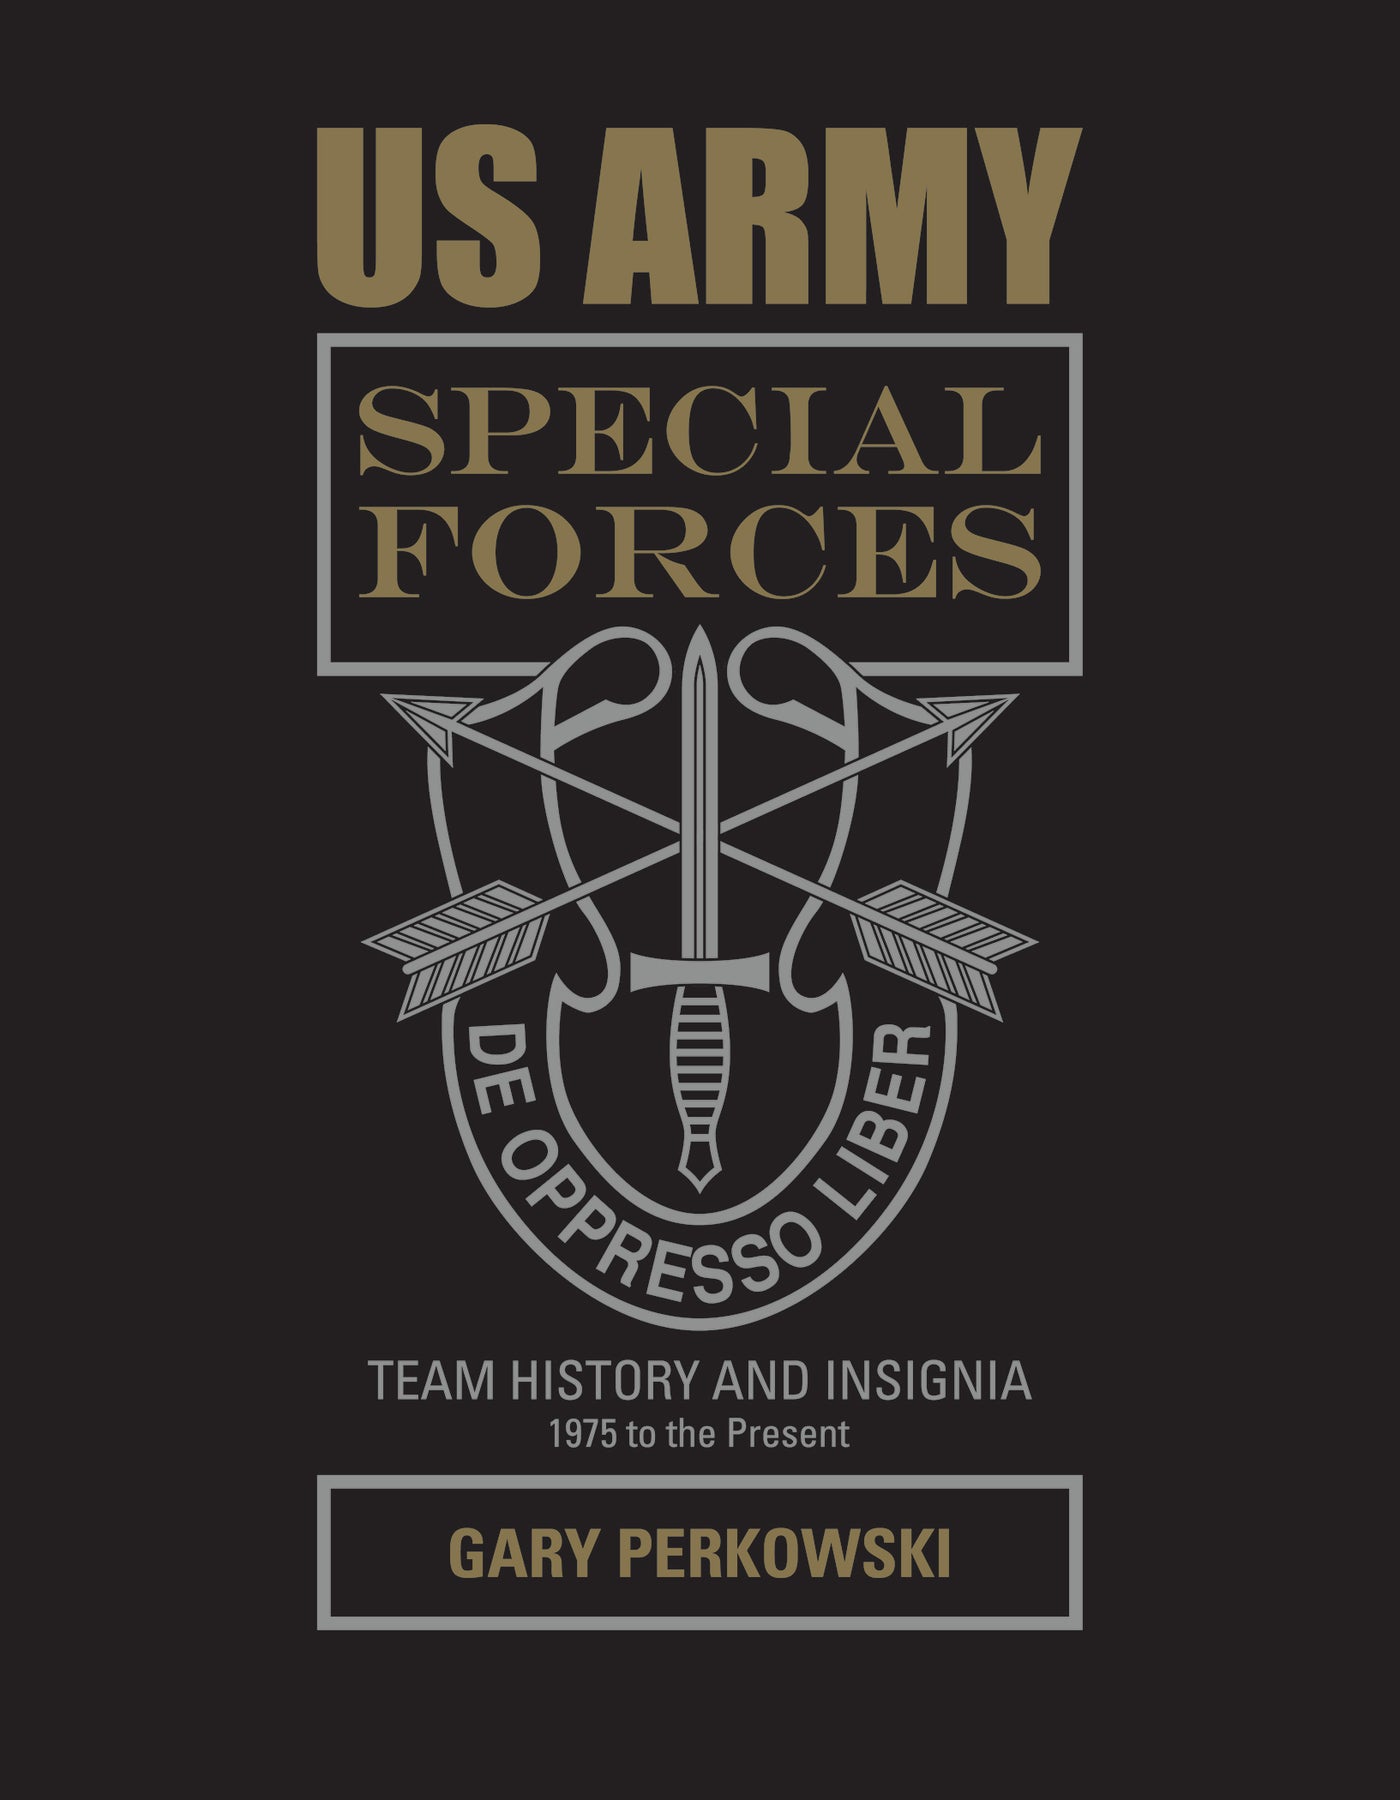 US Army Special Forces Team History and Insignia 1975 to the Present